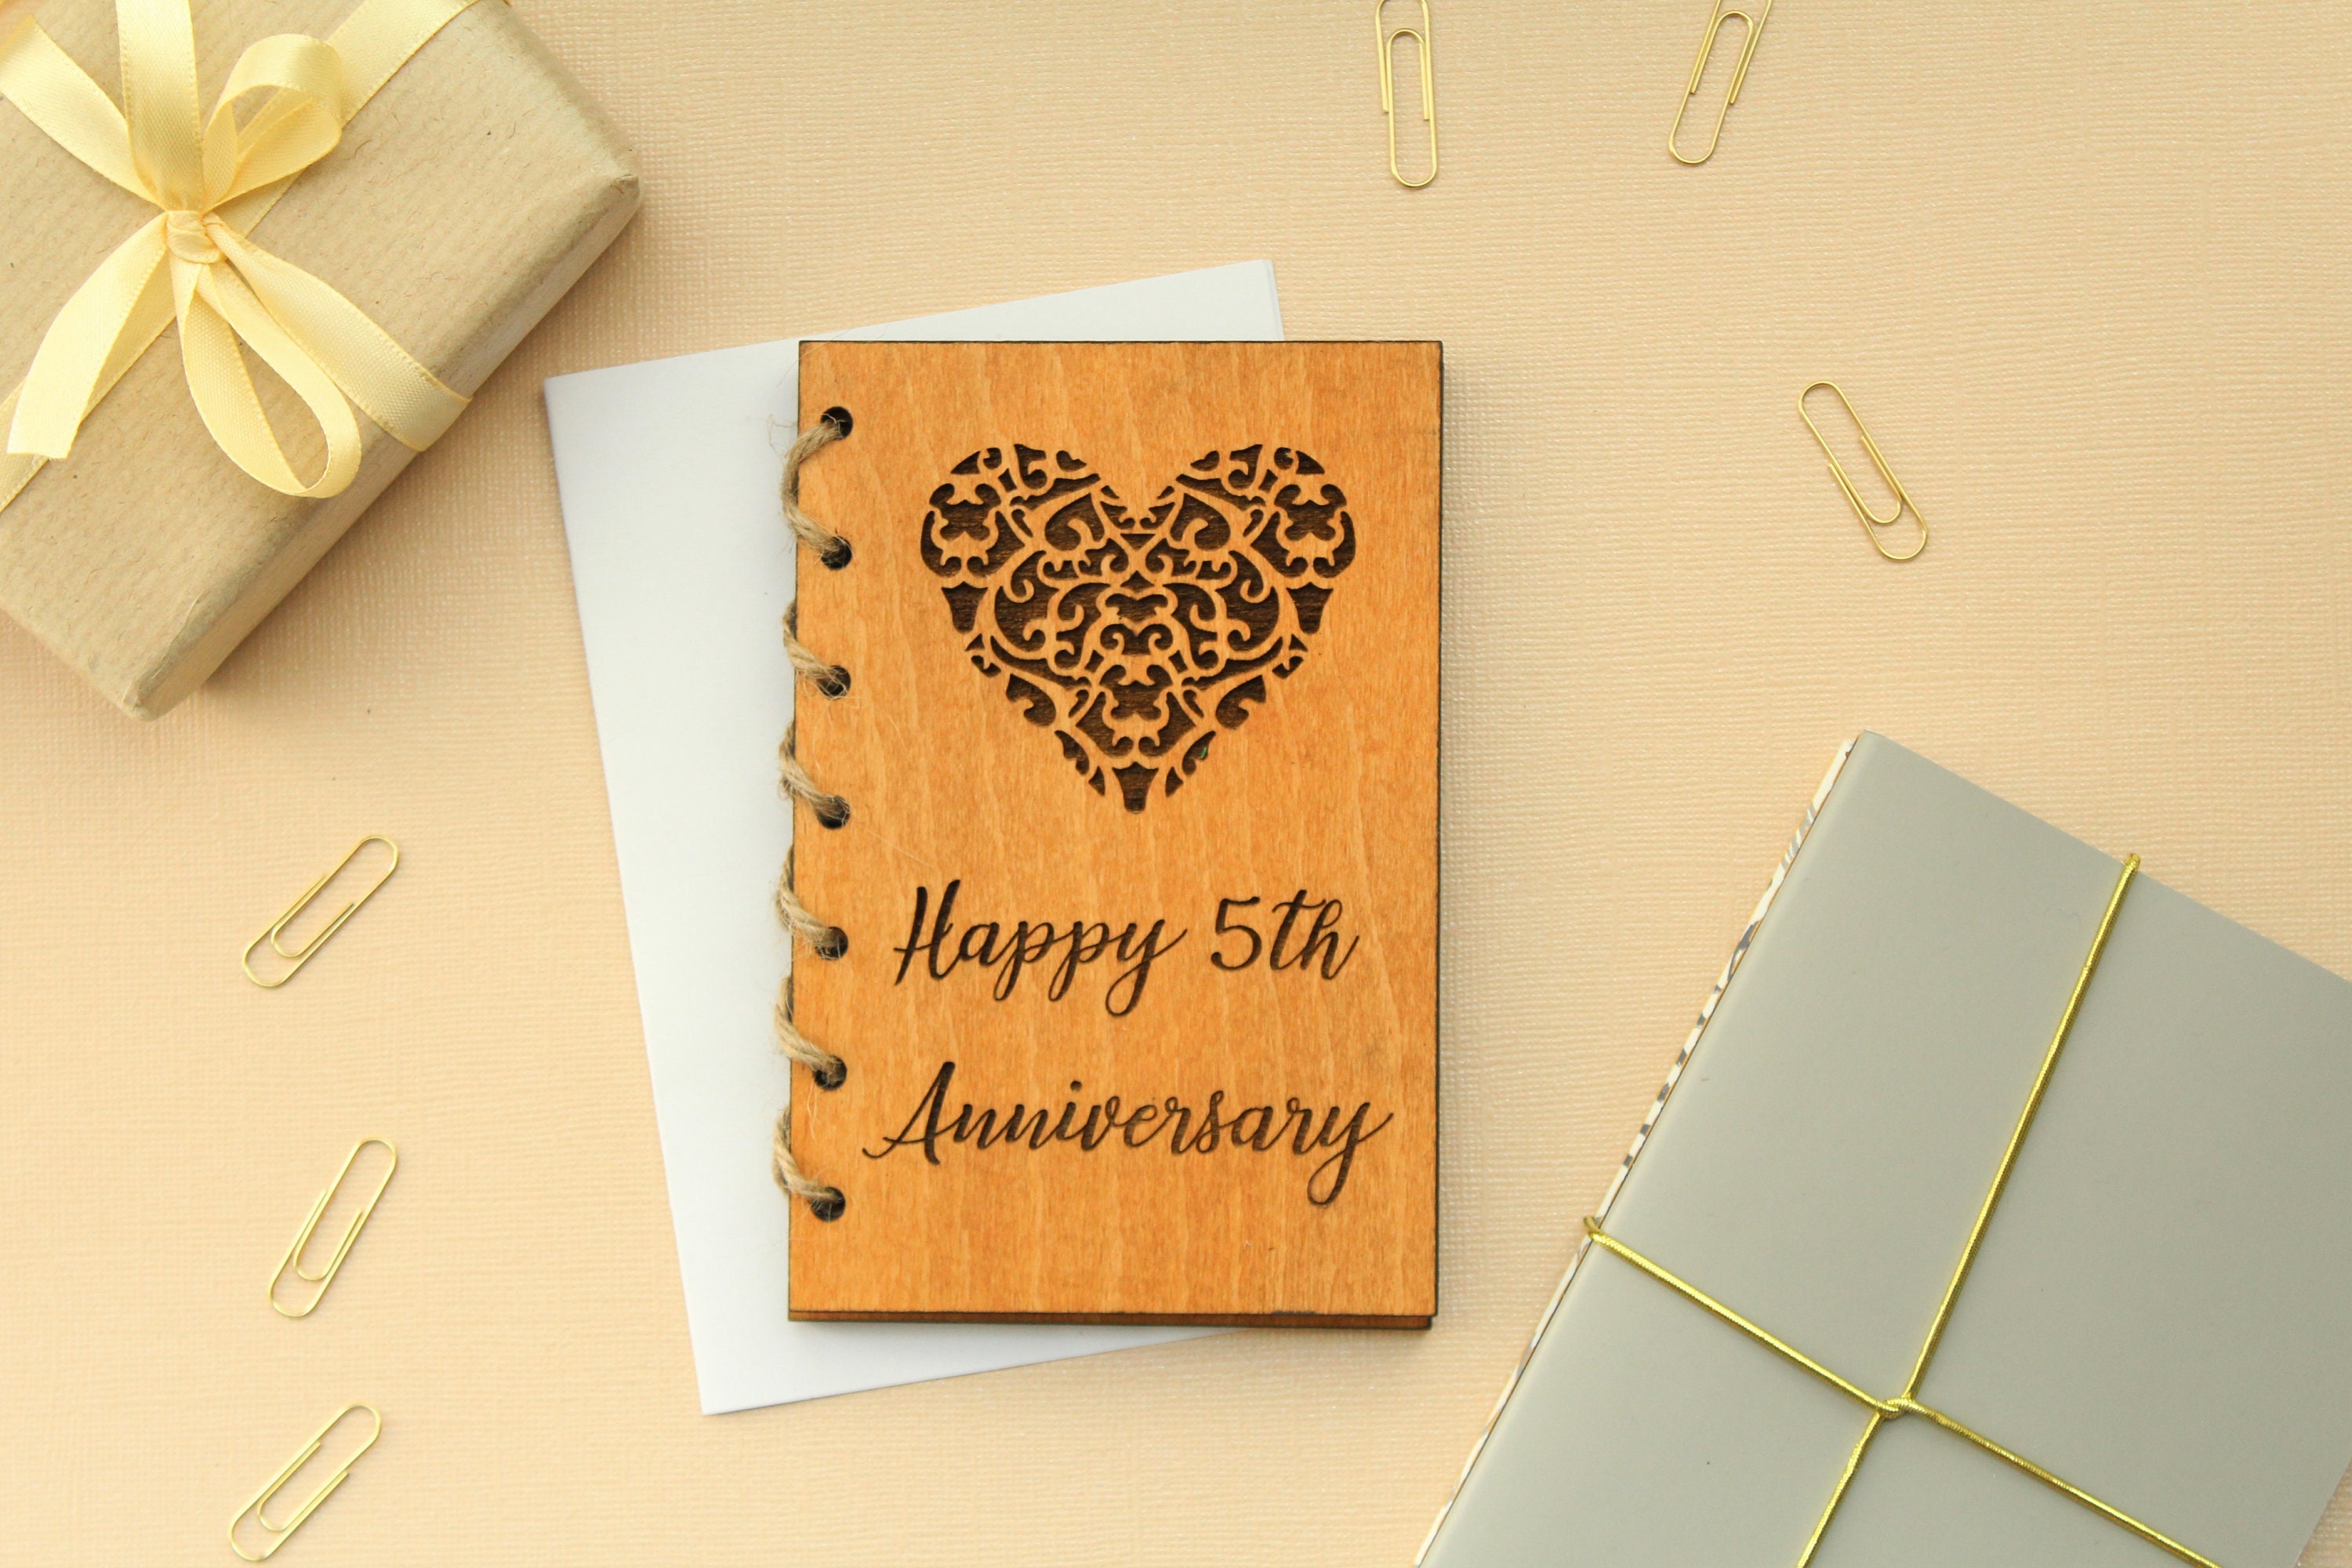 27. 5th Anniversary Wooden Card With Personalized Letter